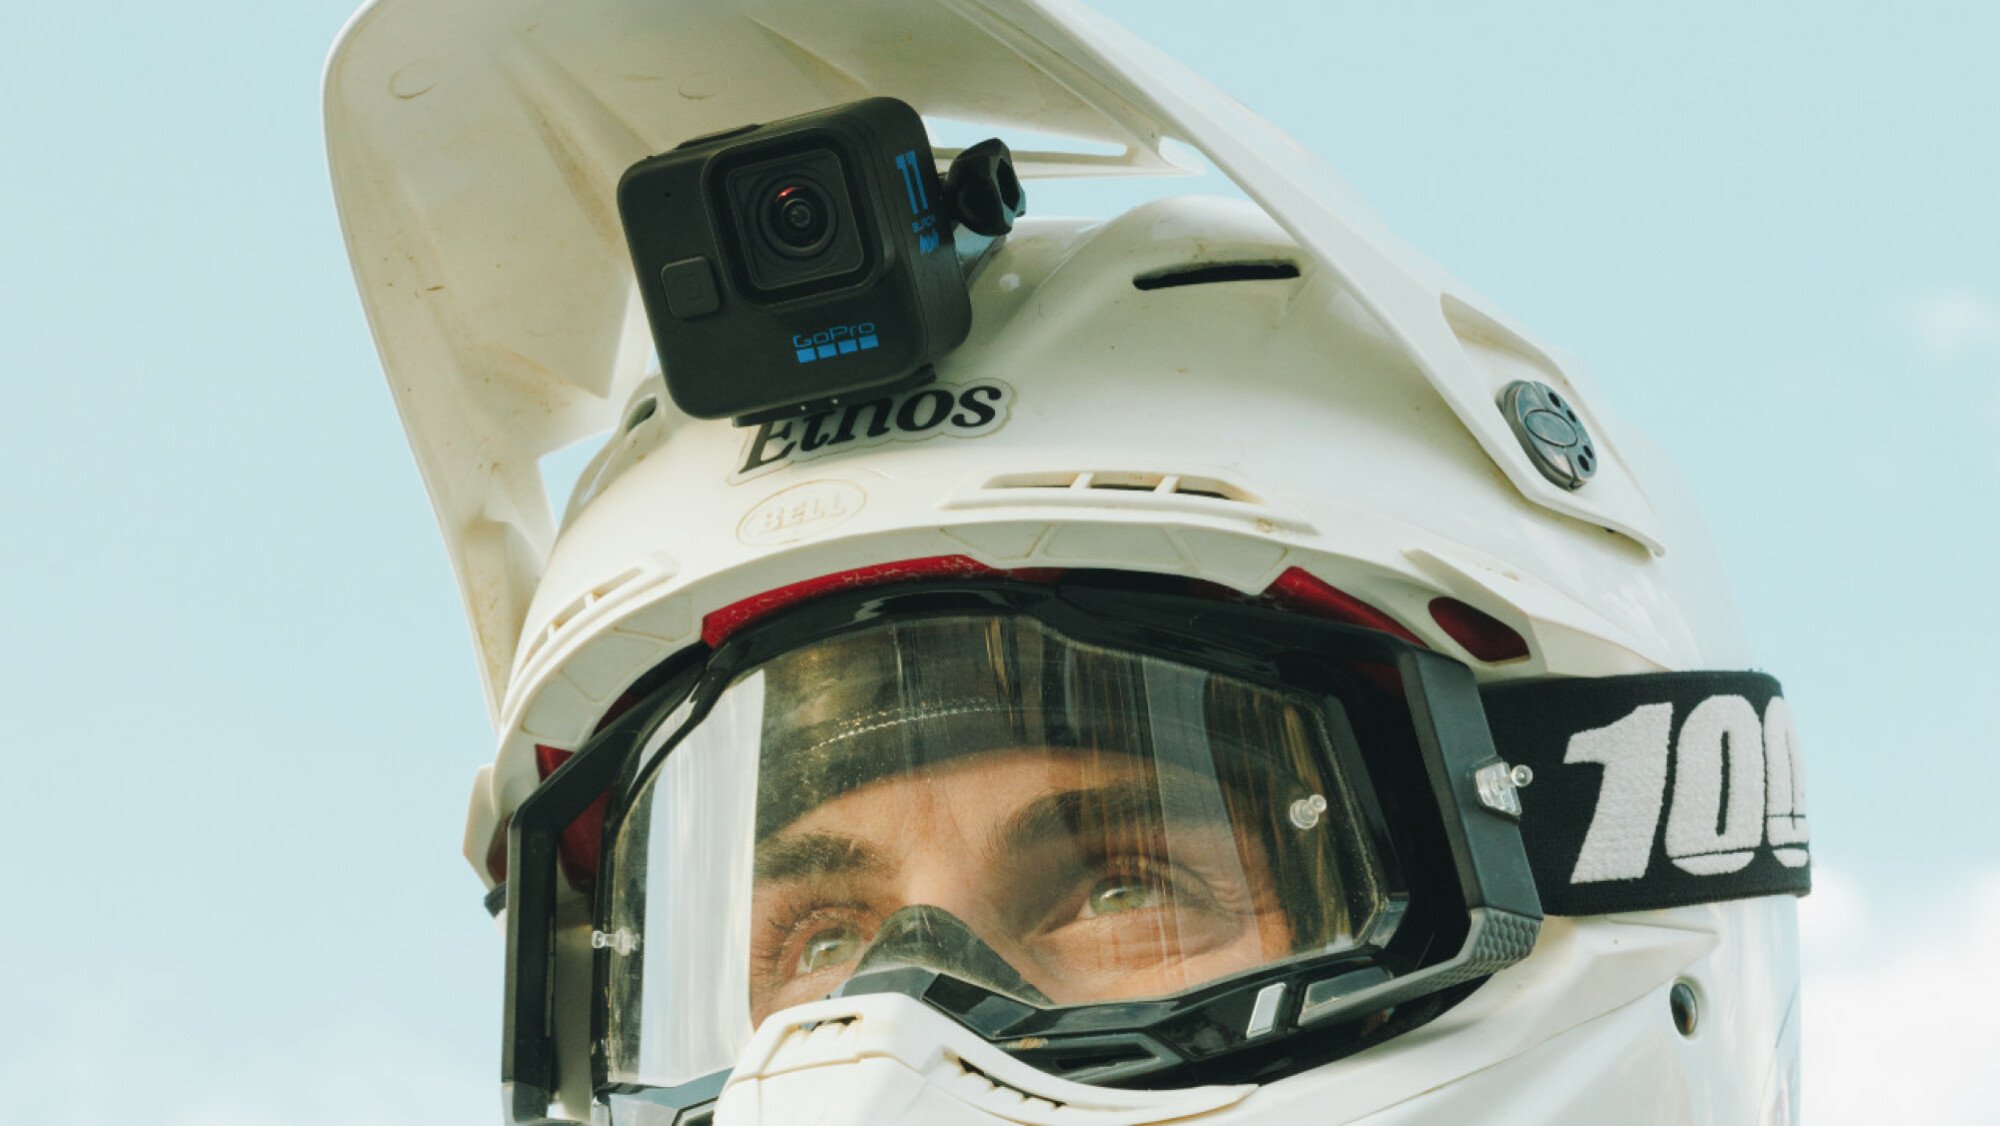 A photograph of a GoPro HERO11 Black Mini mounted on a motorcycling helmet.